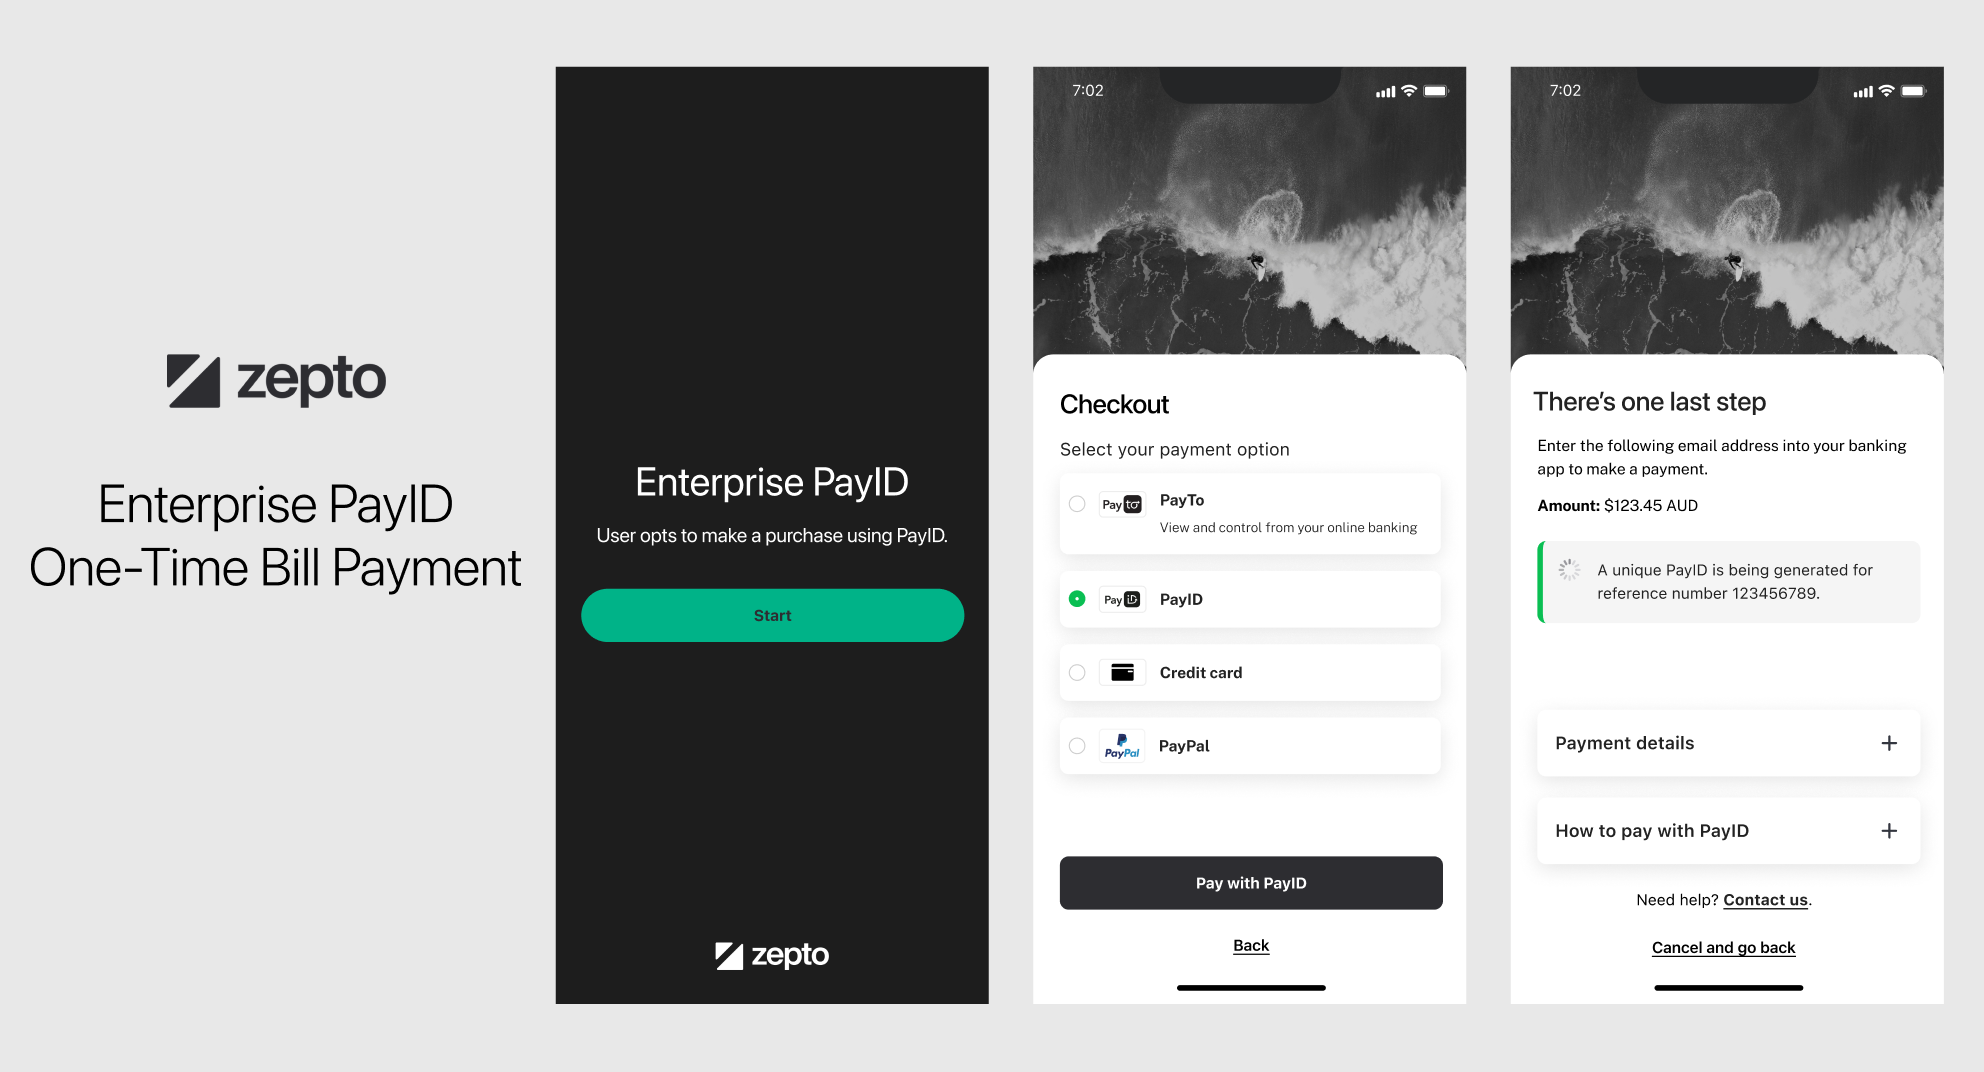 Zepto’s flagship instant-funds transfer solution supercharges millions of transactions each day with the unique, industry-first capability to activate thousands of PayIDs instantaneously.